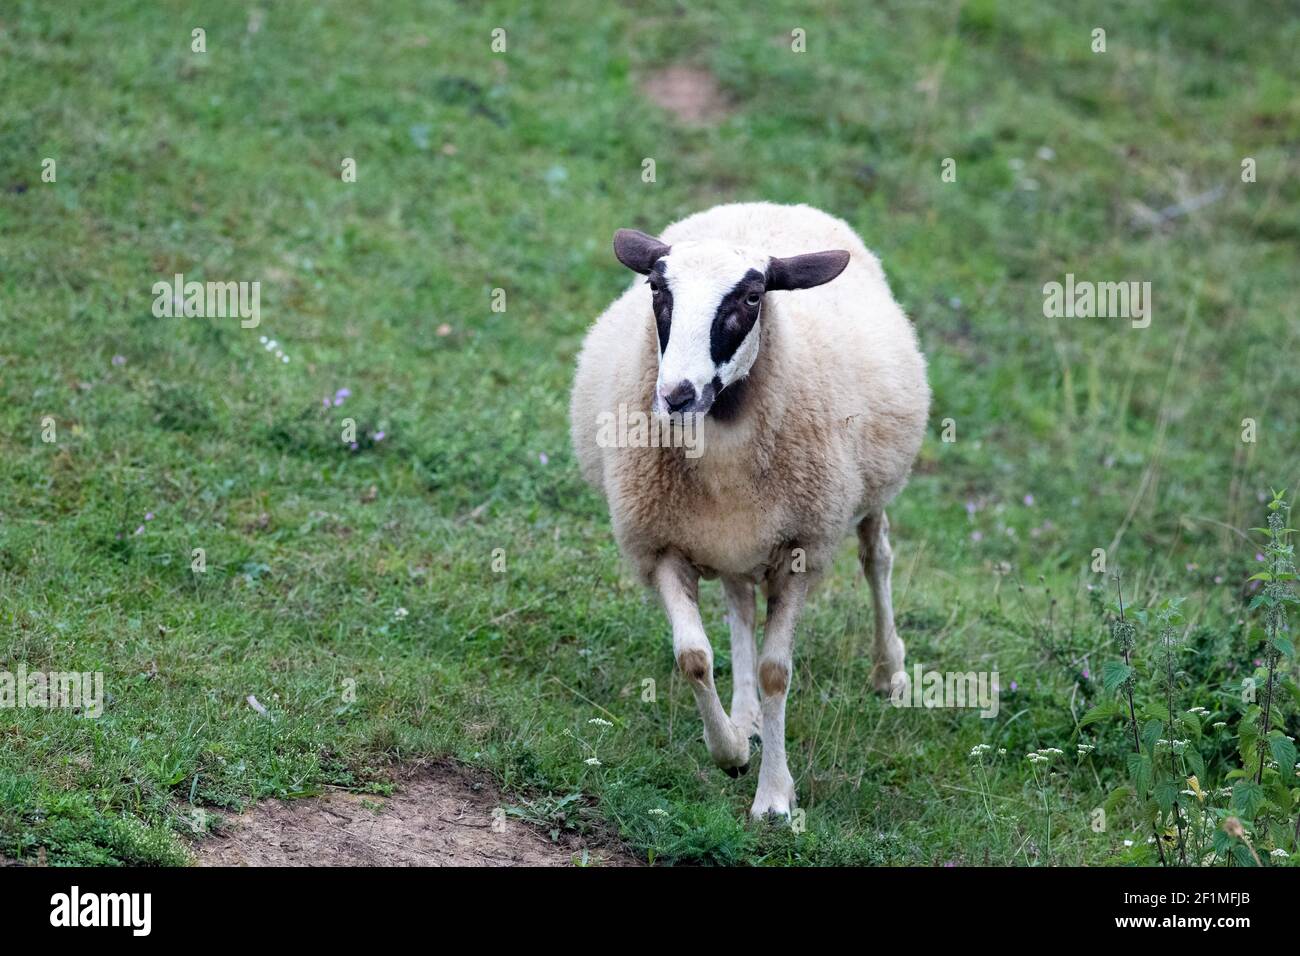 A closeup shot of a lamb running in the field Stock Photo